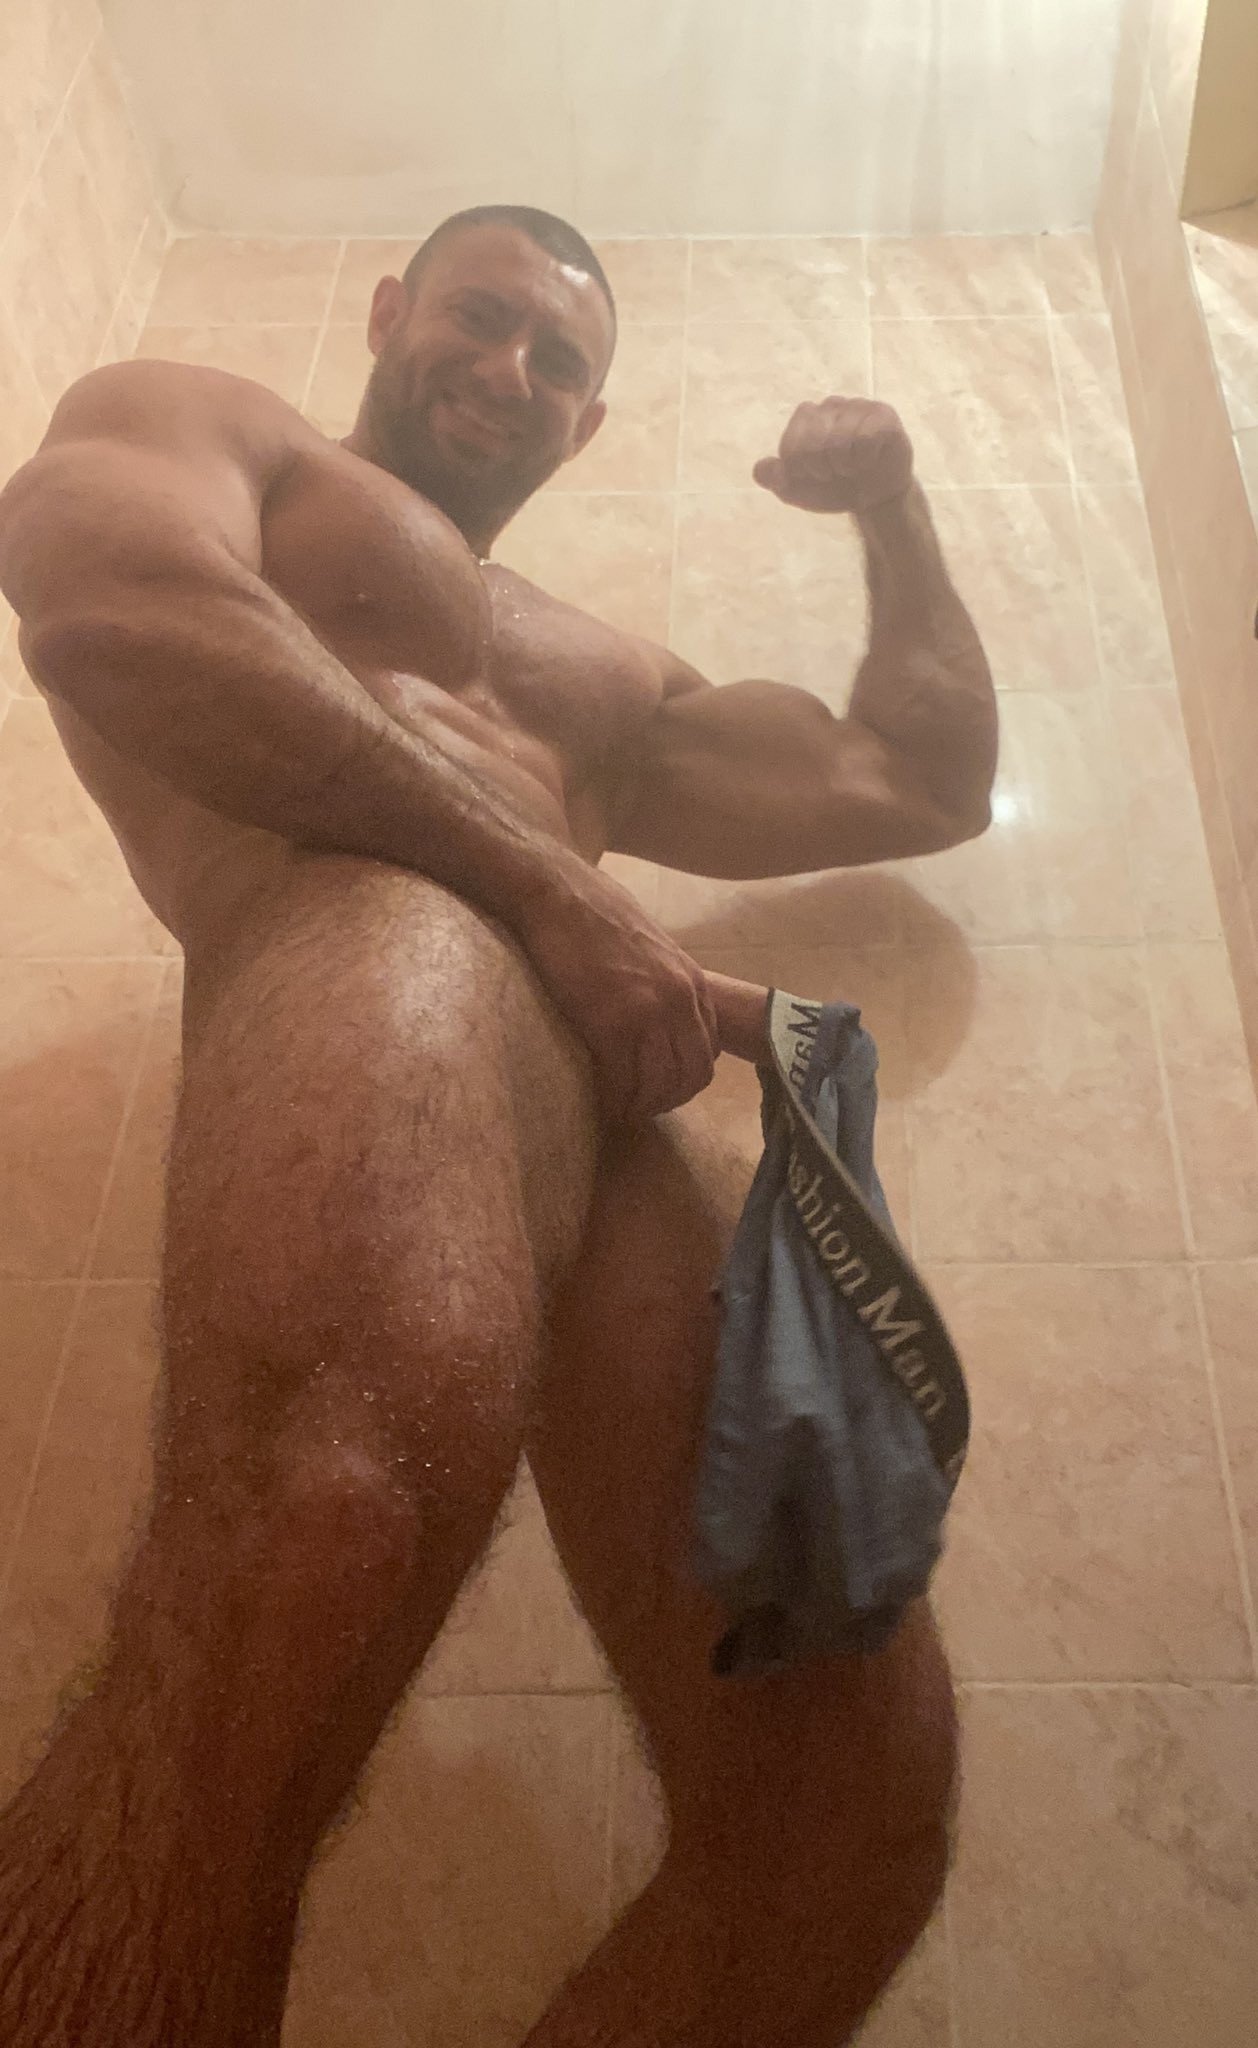 Watch the Photo by Ultra-Masculine-XXX with the username @Ultra-Masculine-XXX, posted on May 23, 2022. The post is about the topic Gay Muscle. and the text says 'Artur Kratko #ArturKratko #muscle #hunk'